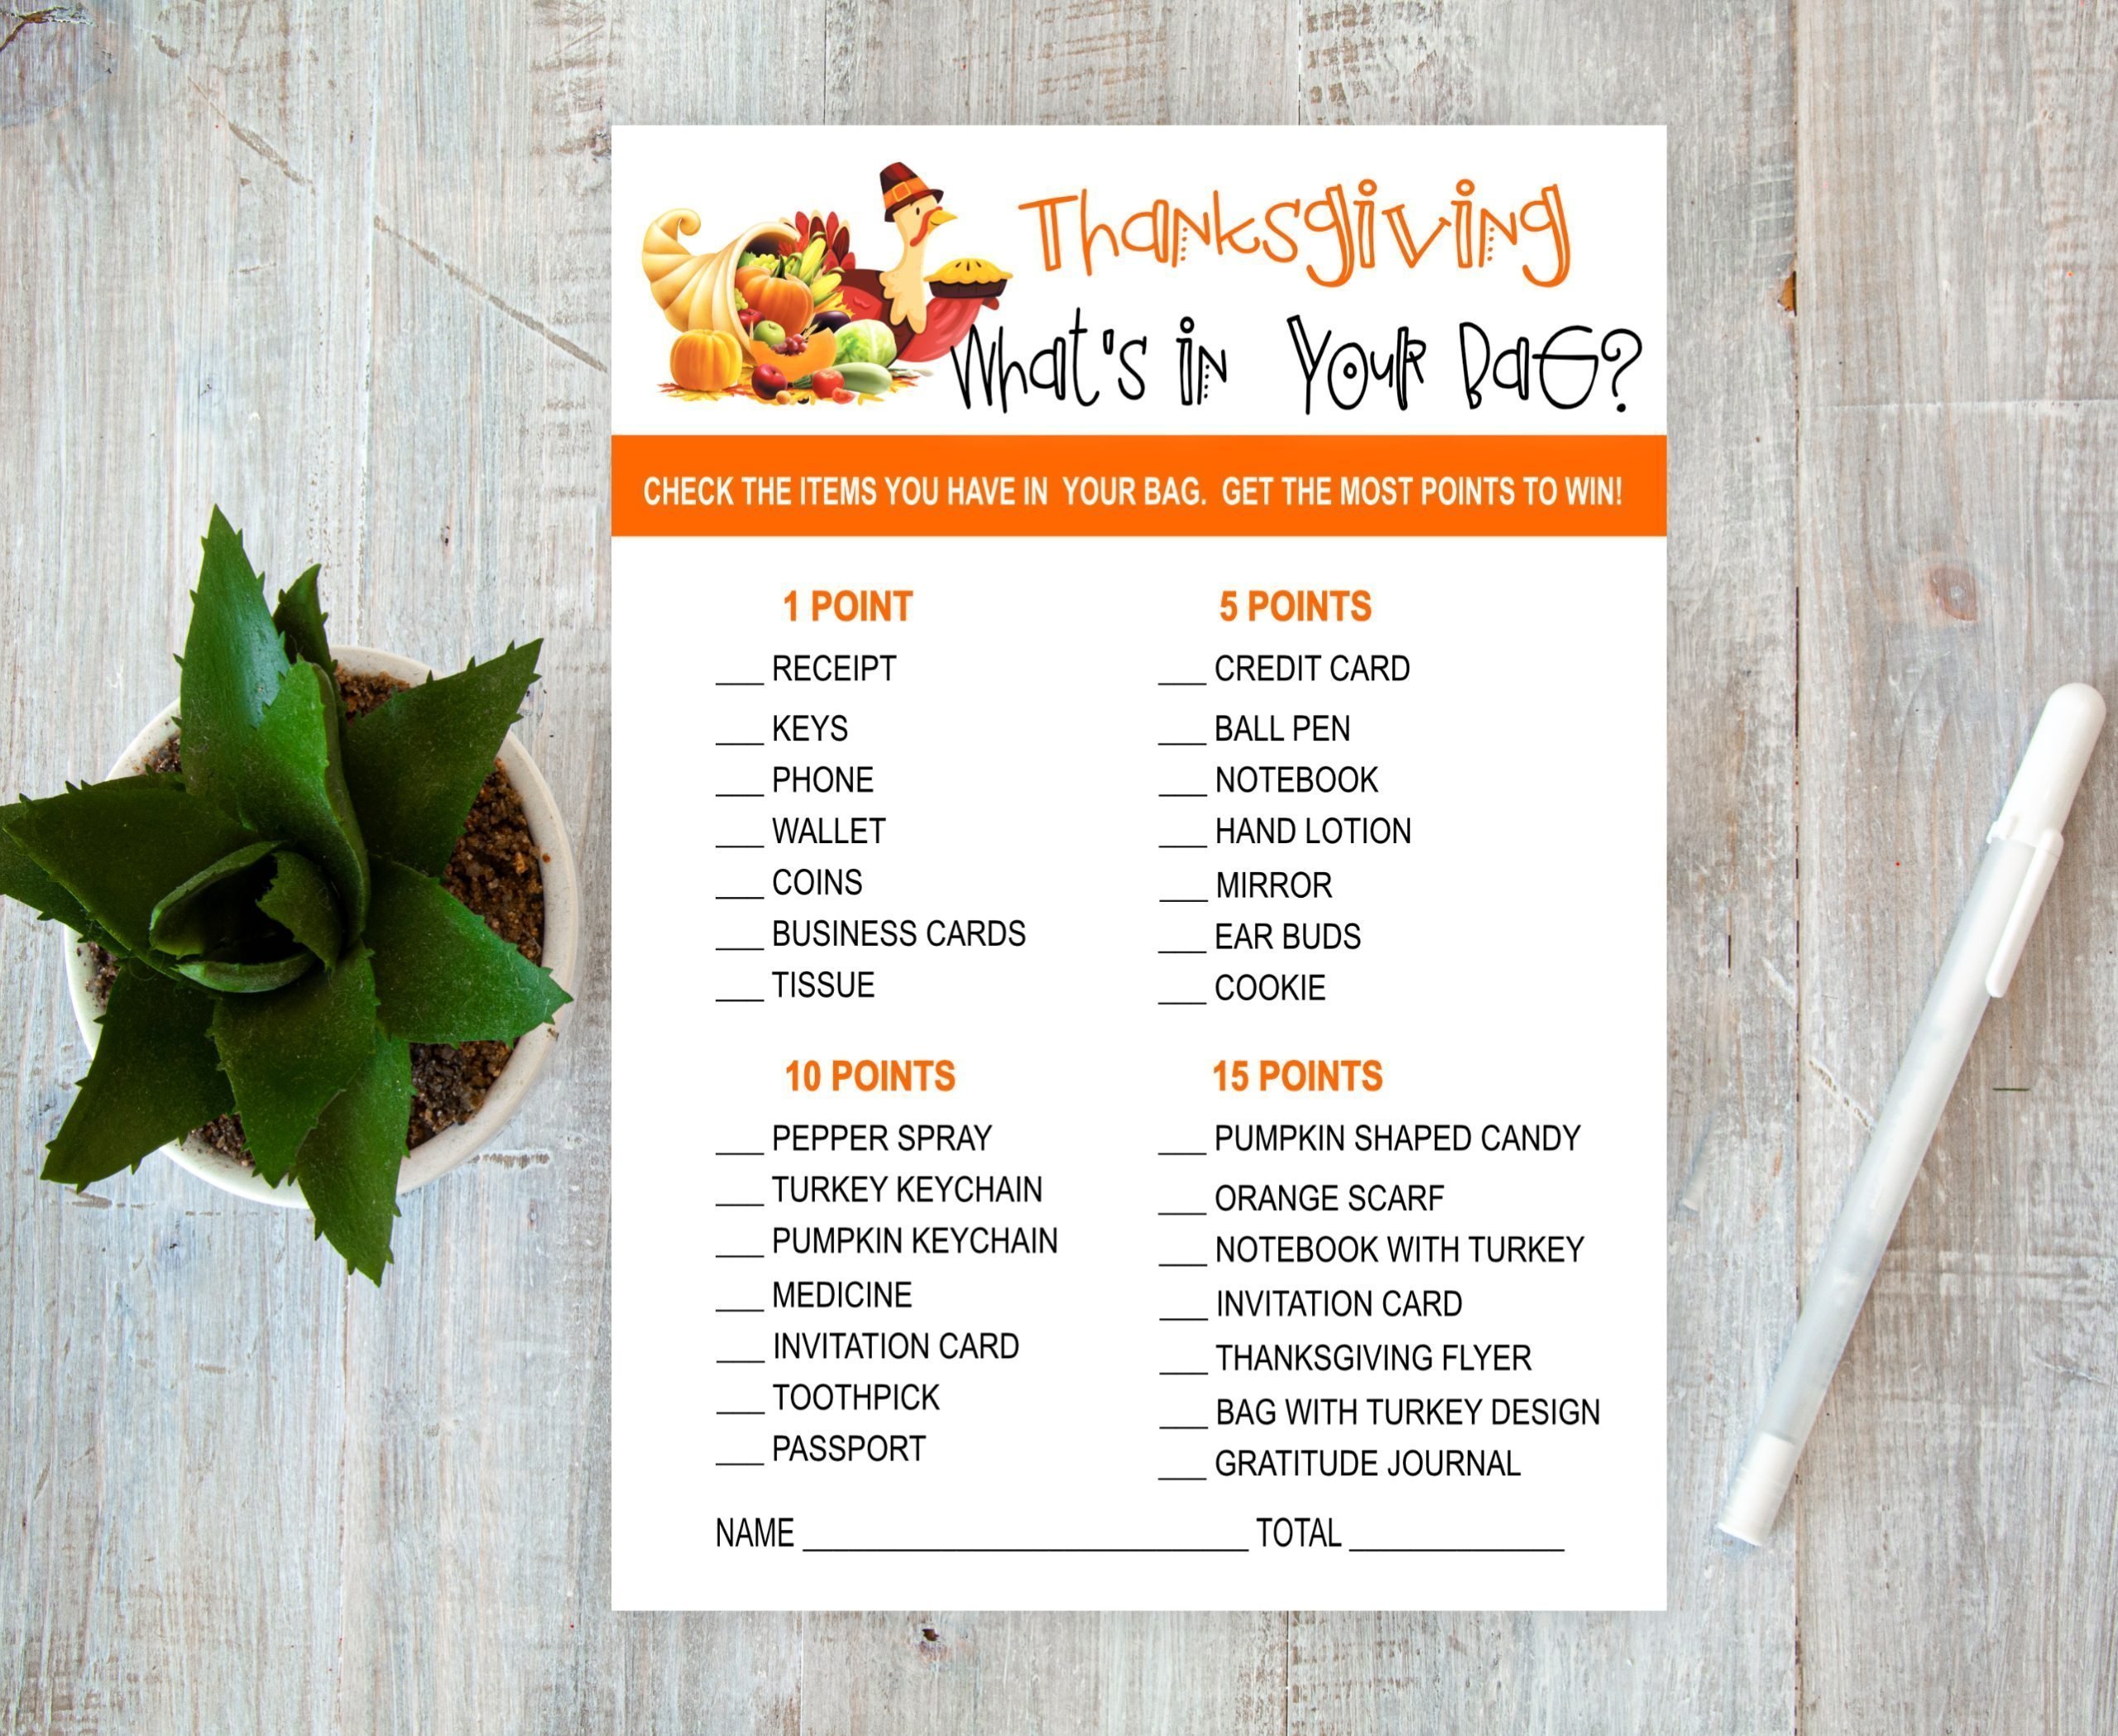 HOLIDAY Thanksgiving What’s In Your Bag Printable Fun Thanksgiving Day Game games_for_adults